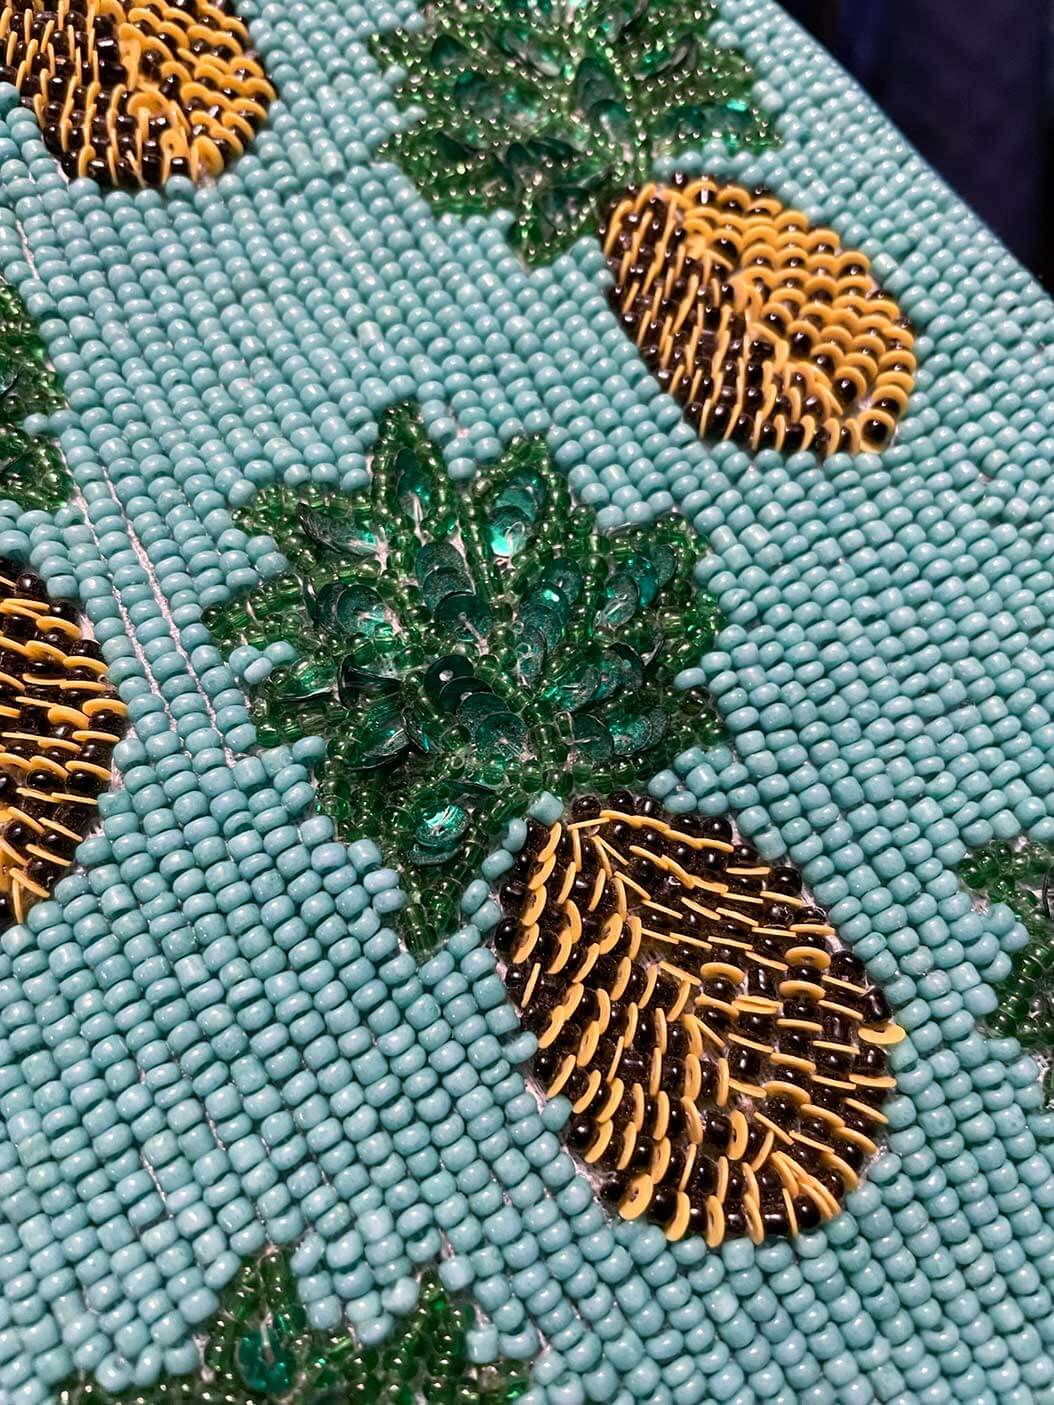 drive-swim-fly-pineapple-collection-beads-beaded-pineapple-purse-clutch-close-up